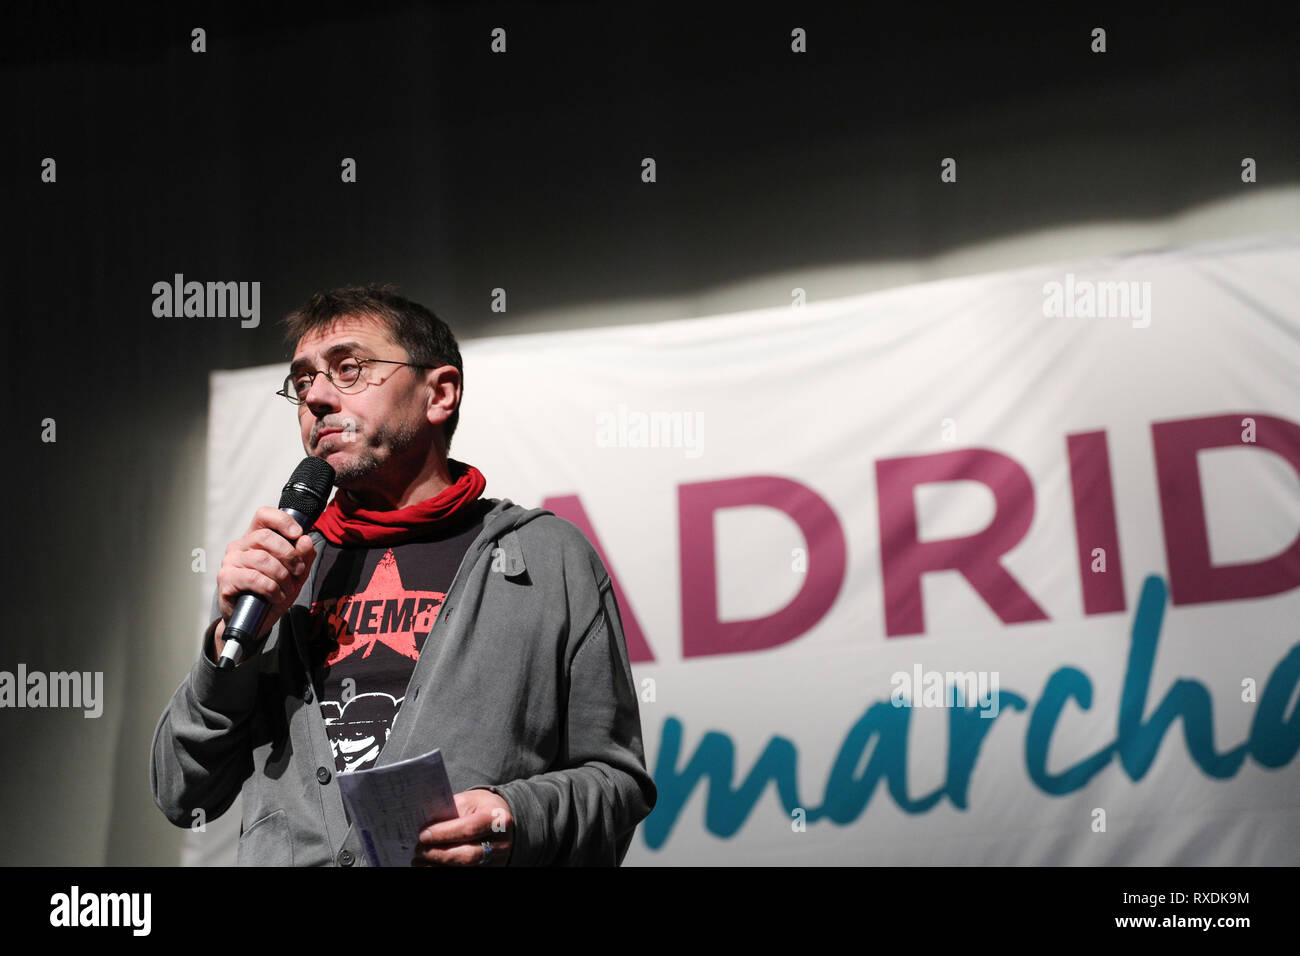 Madrid, Spain. 09th March, 2019.Juan Carlos Monedero seen speaking at the closing of the event #PodemosEnMarcha2019 Credit: Jesús Hellin/Alamy Live News Stock Photo